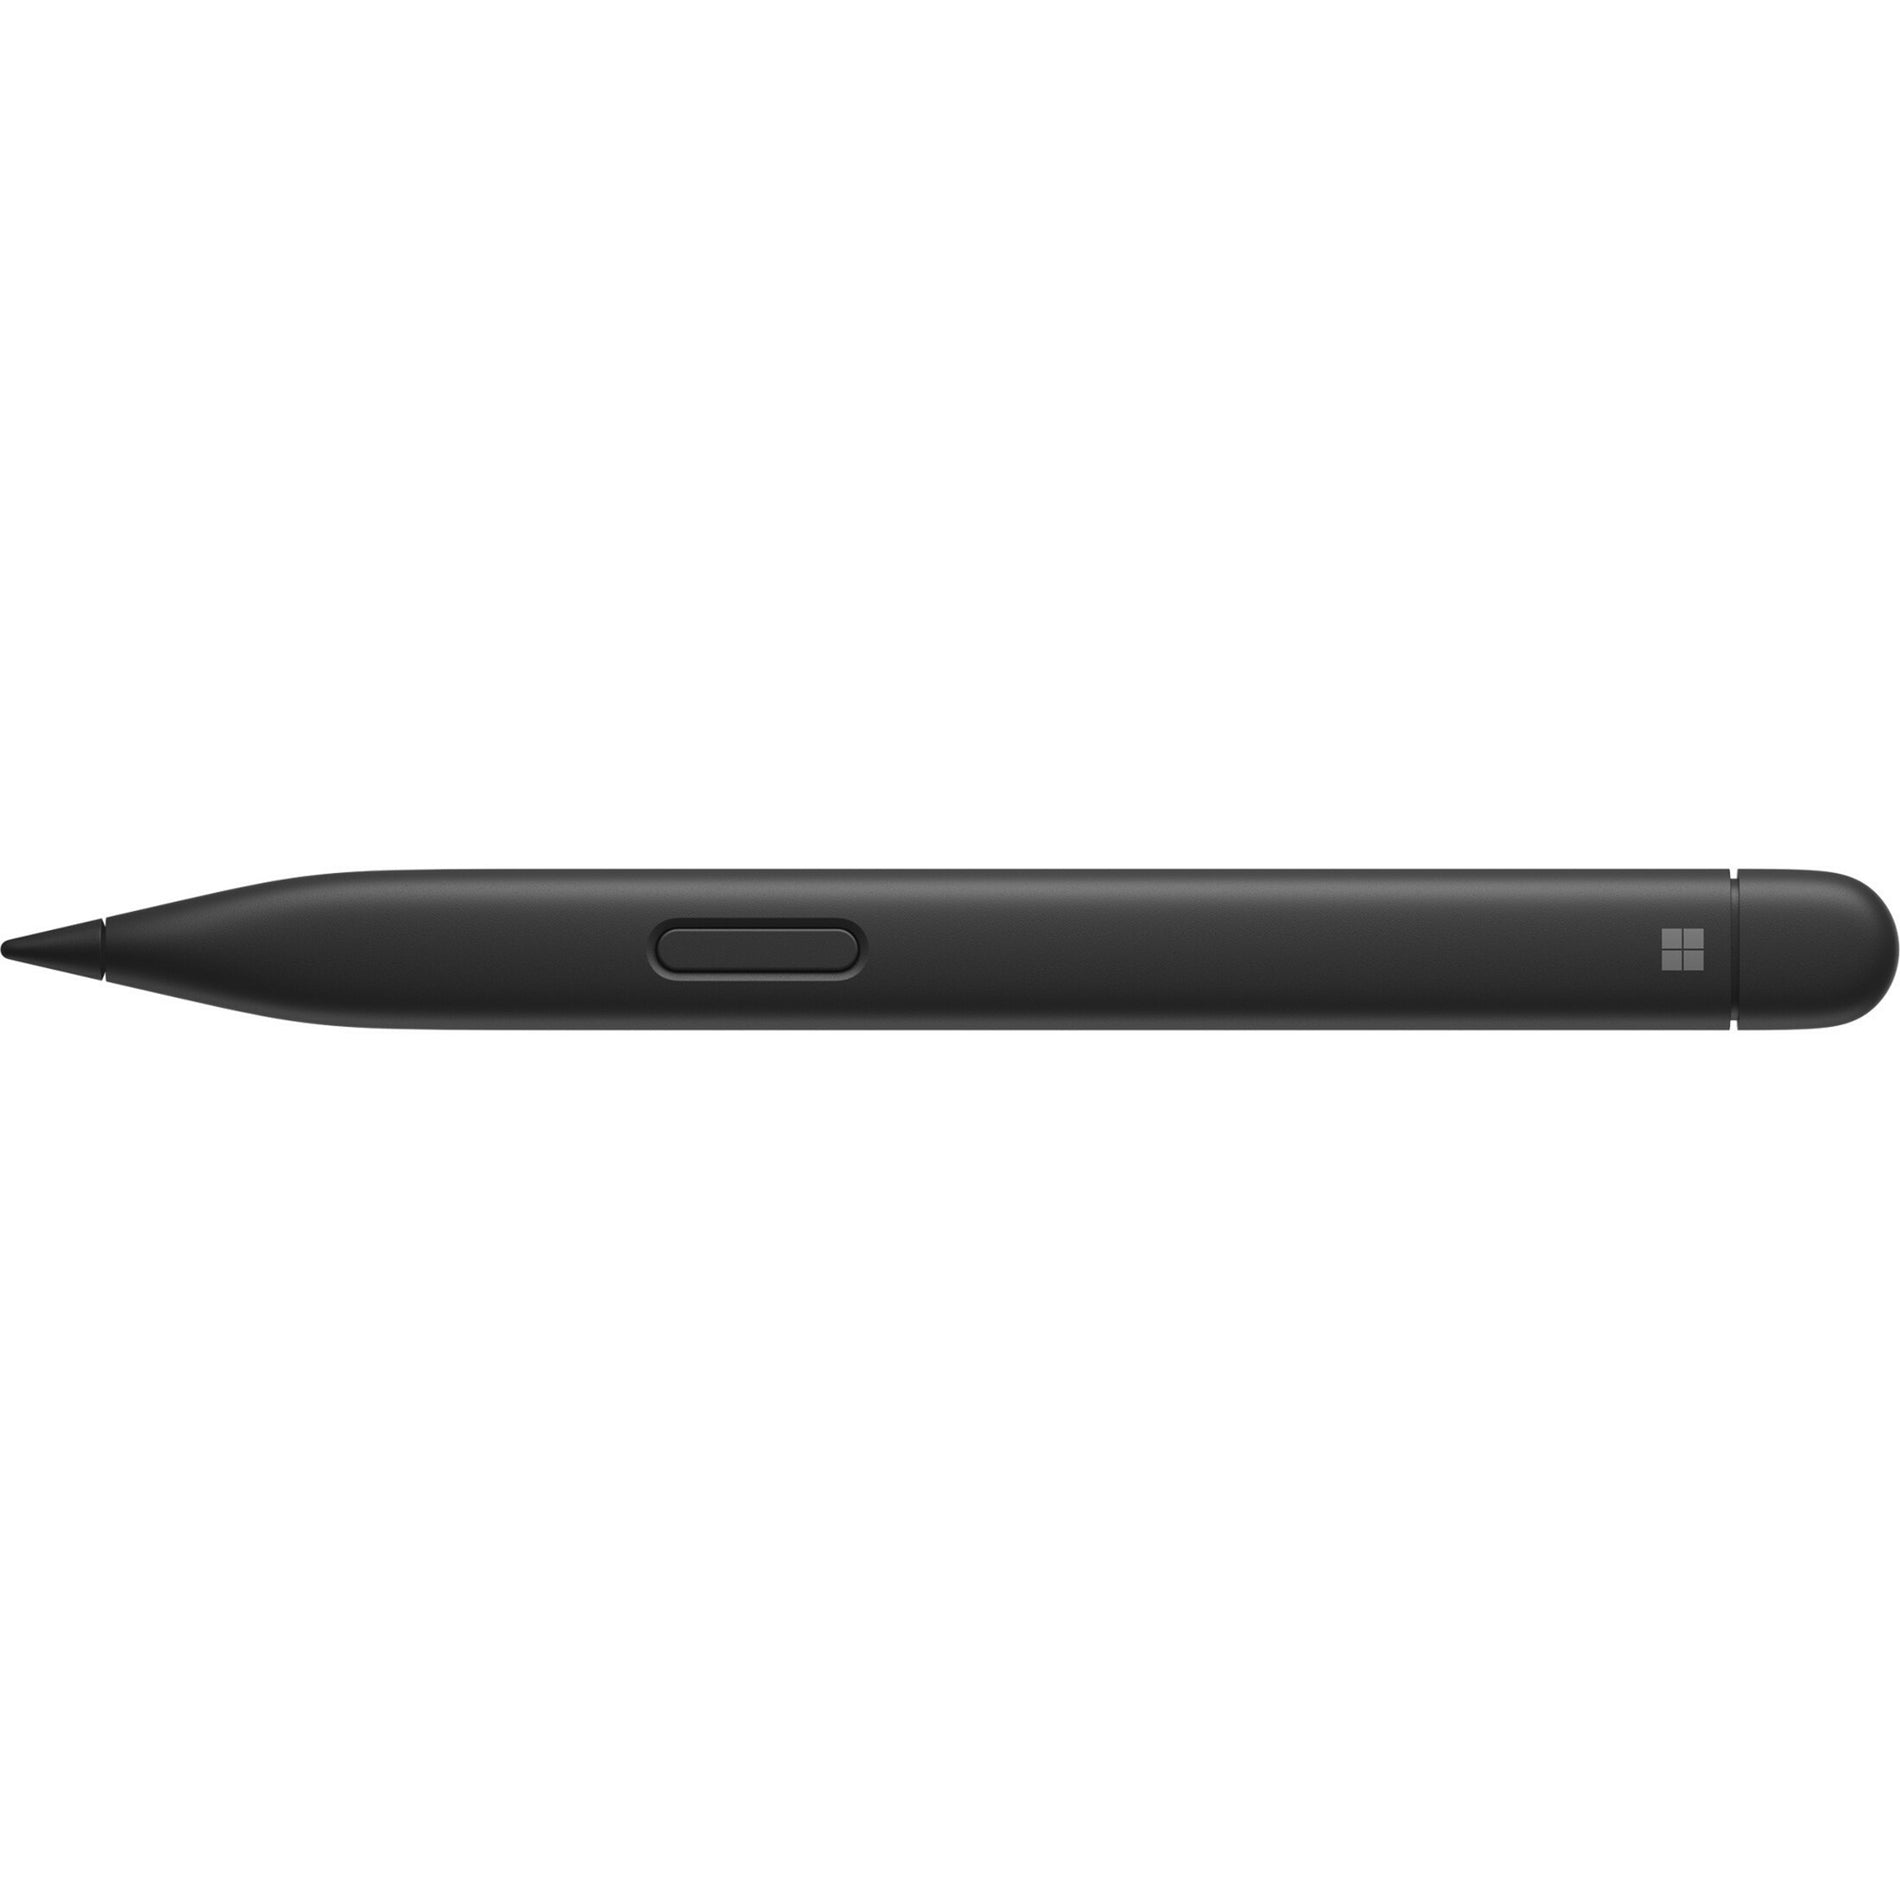 Microsoft 8WY-00001 Surface Slim Pen 2 Stylus, Bluetooth, Active, 4096 Pressure Levels, 15 Hour Battery Life